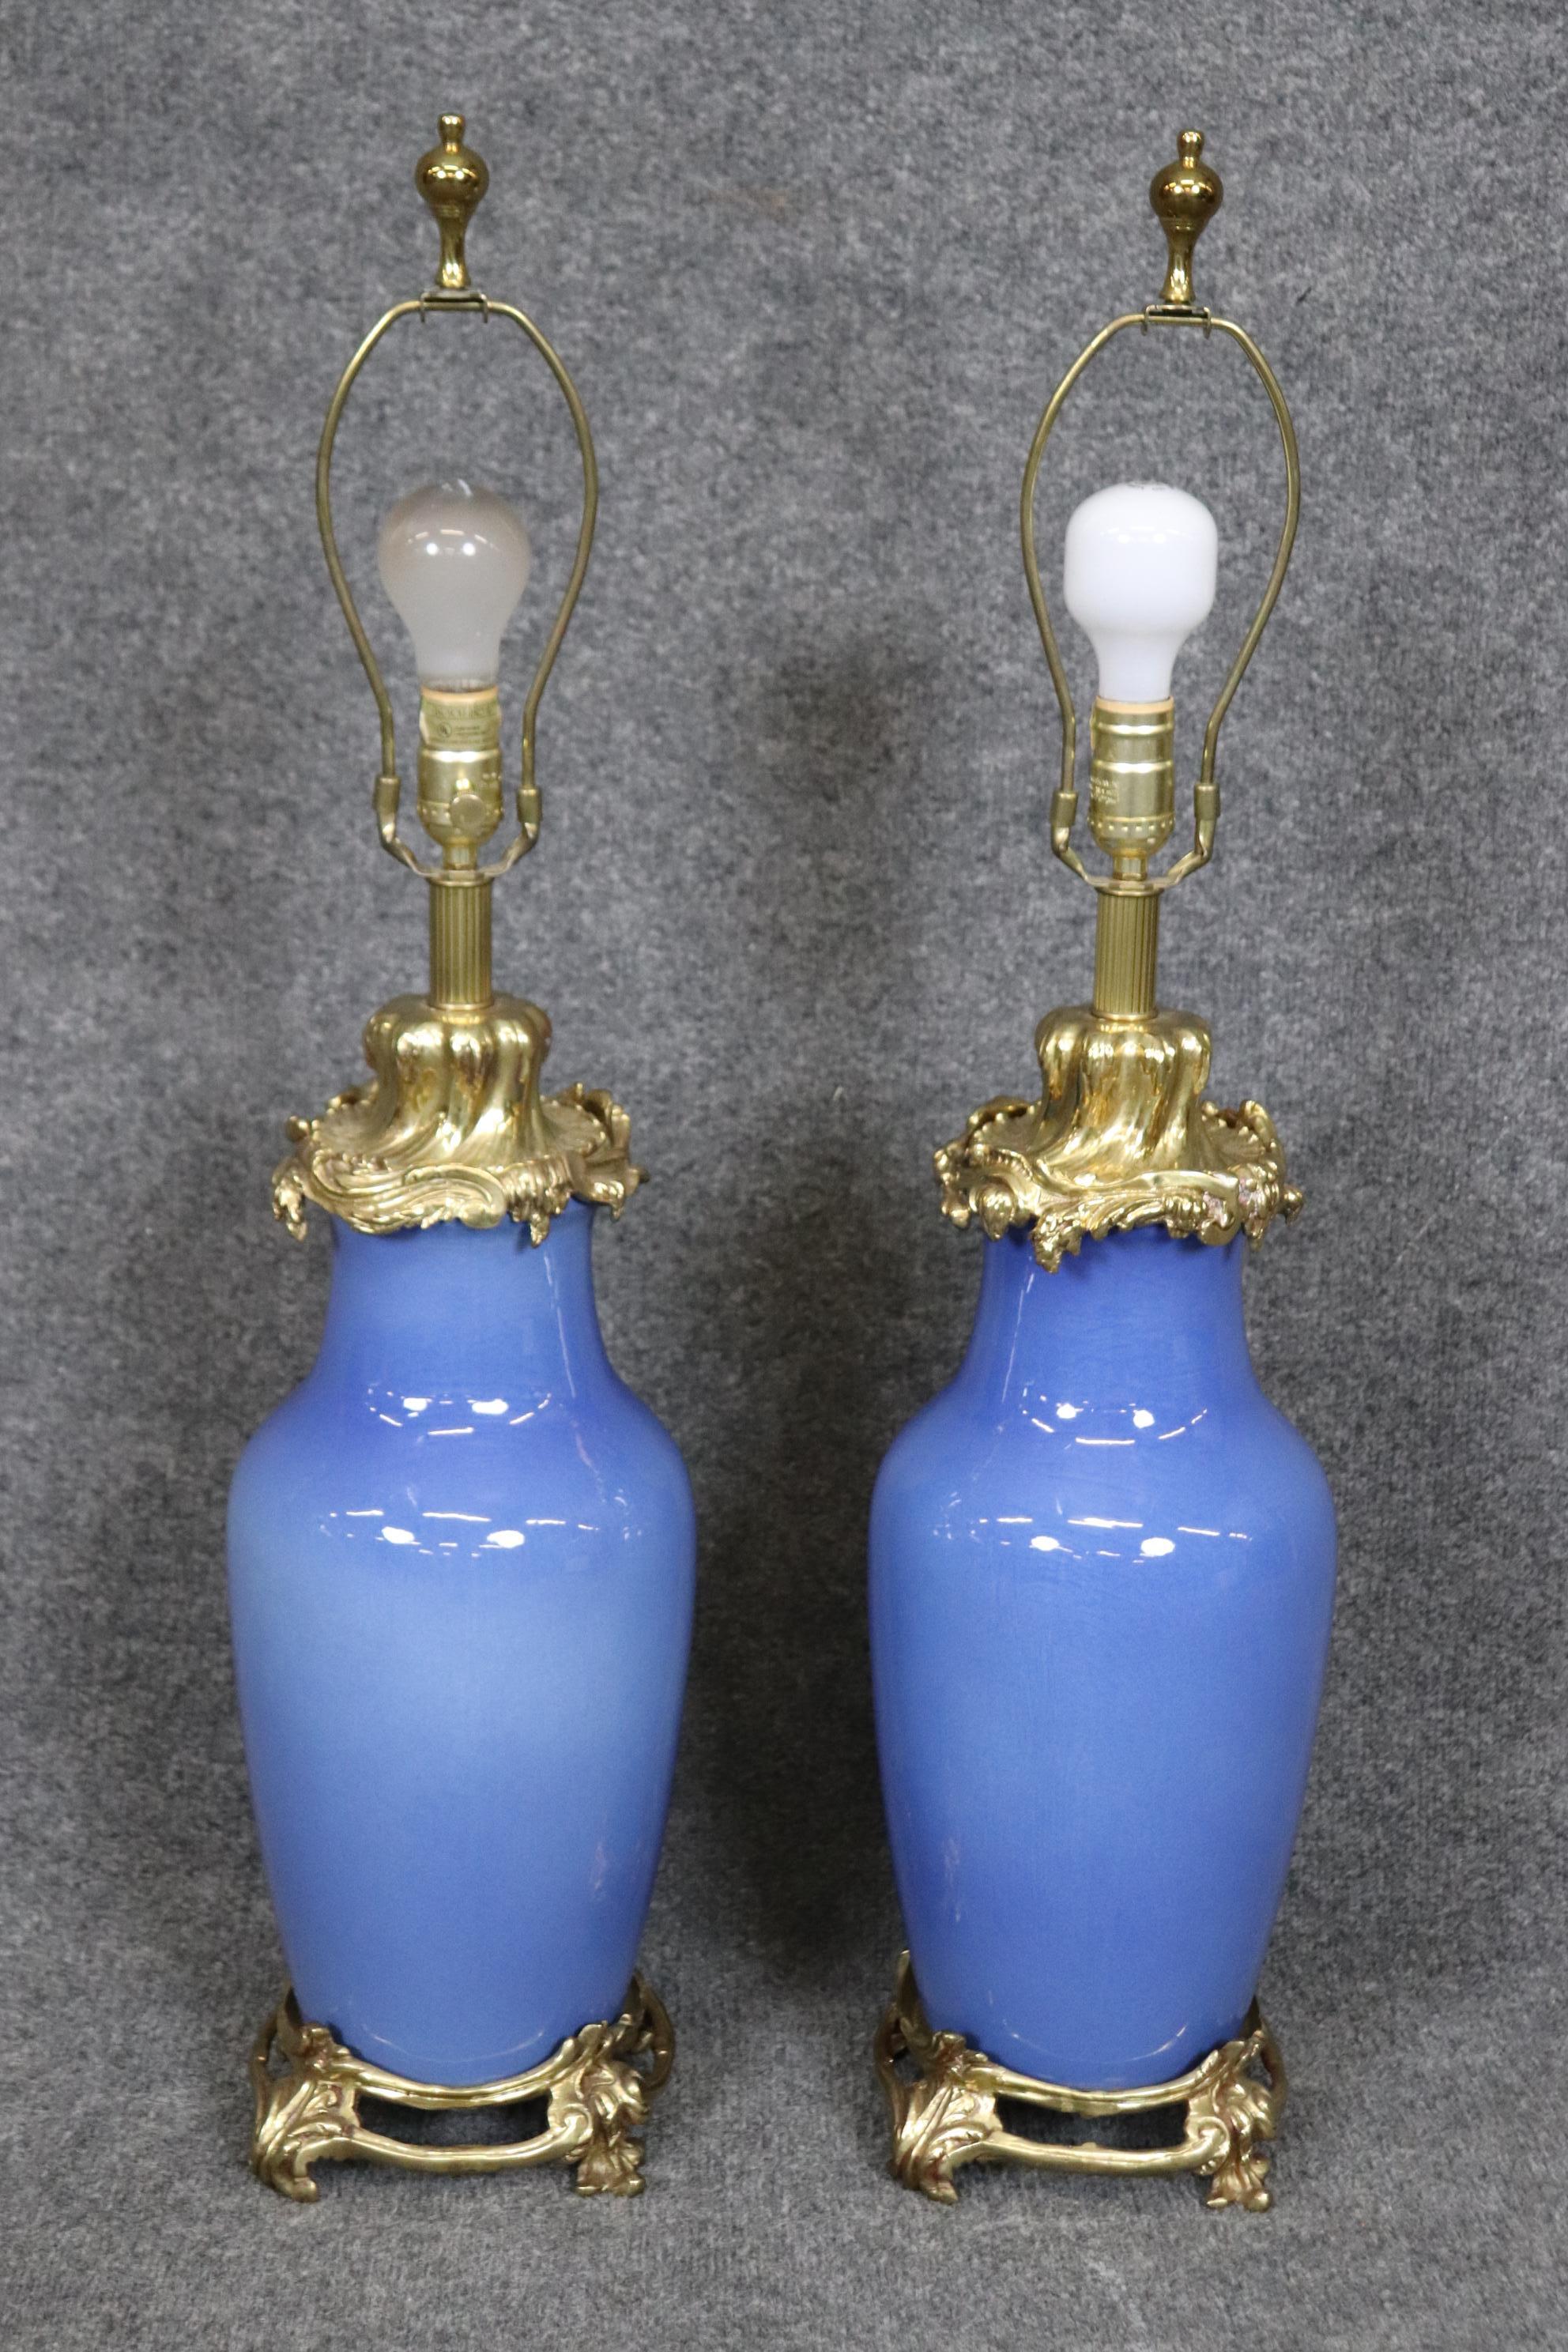 This is a gorgeous pair of extremely High Quality cobalt blue and solid bronze or heavy brass ormolu that's bright and in beautifully detailed. The table lamps are French and not old so they are in good used condition with minor signs of age and